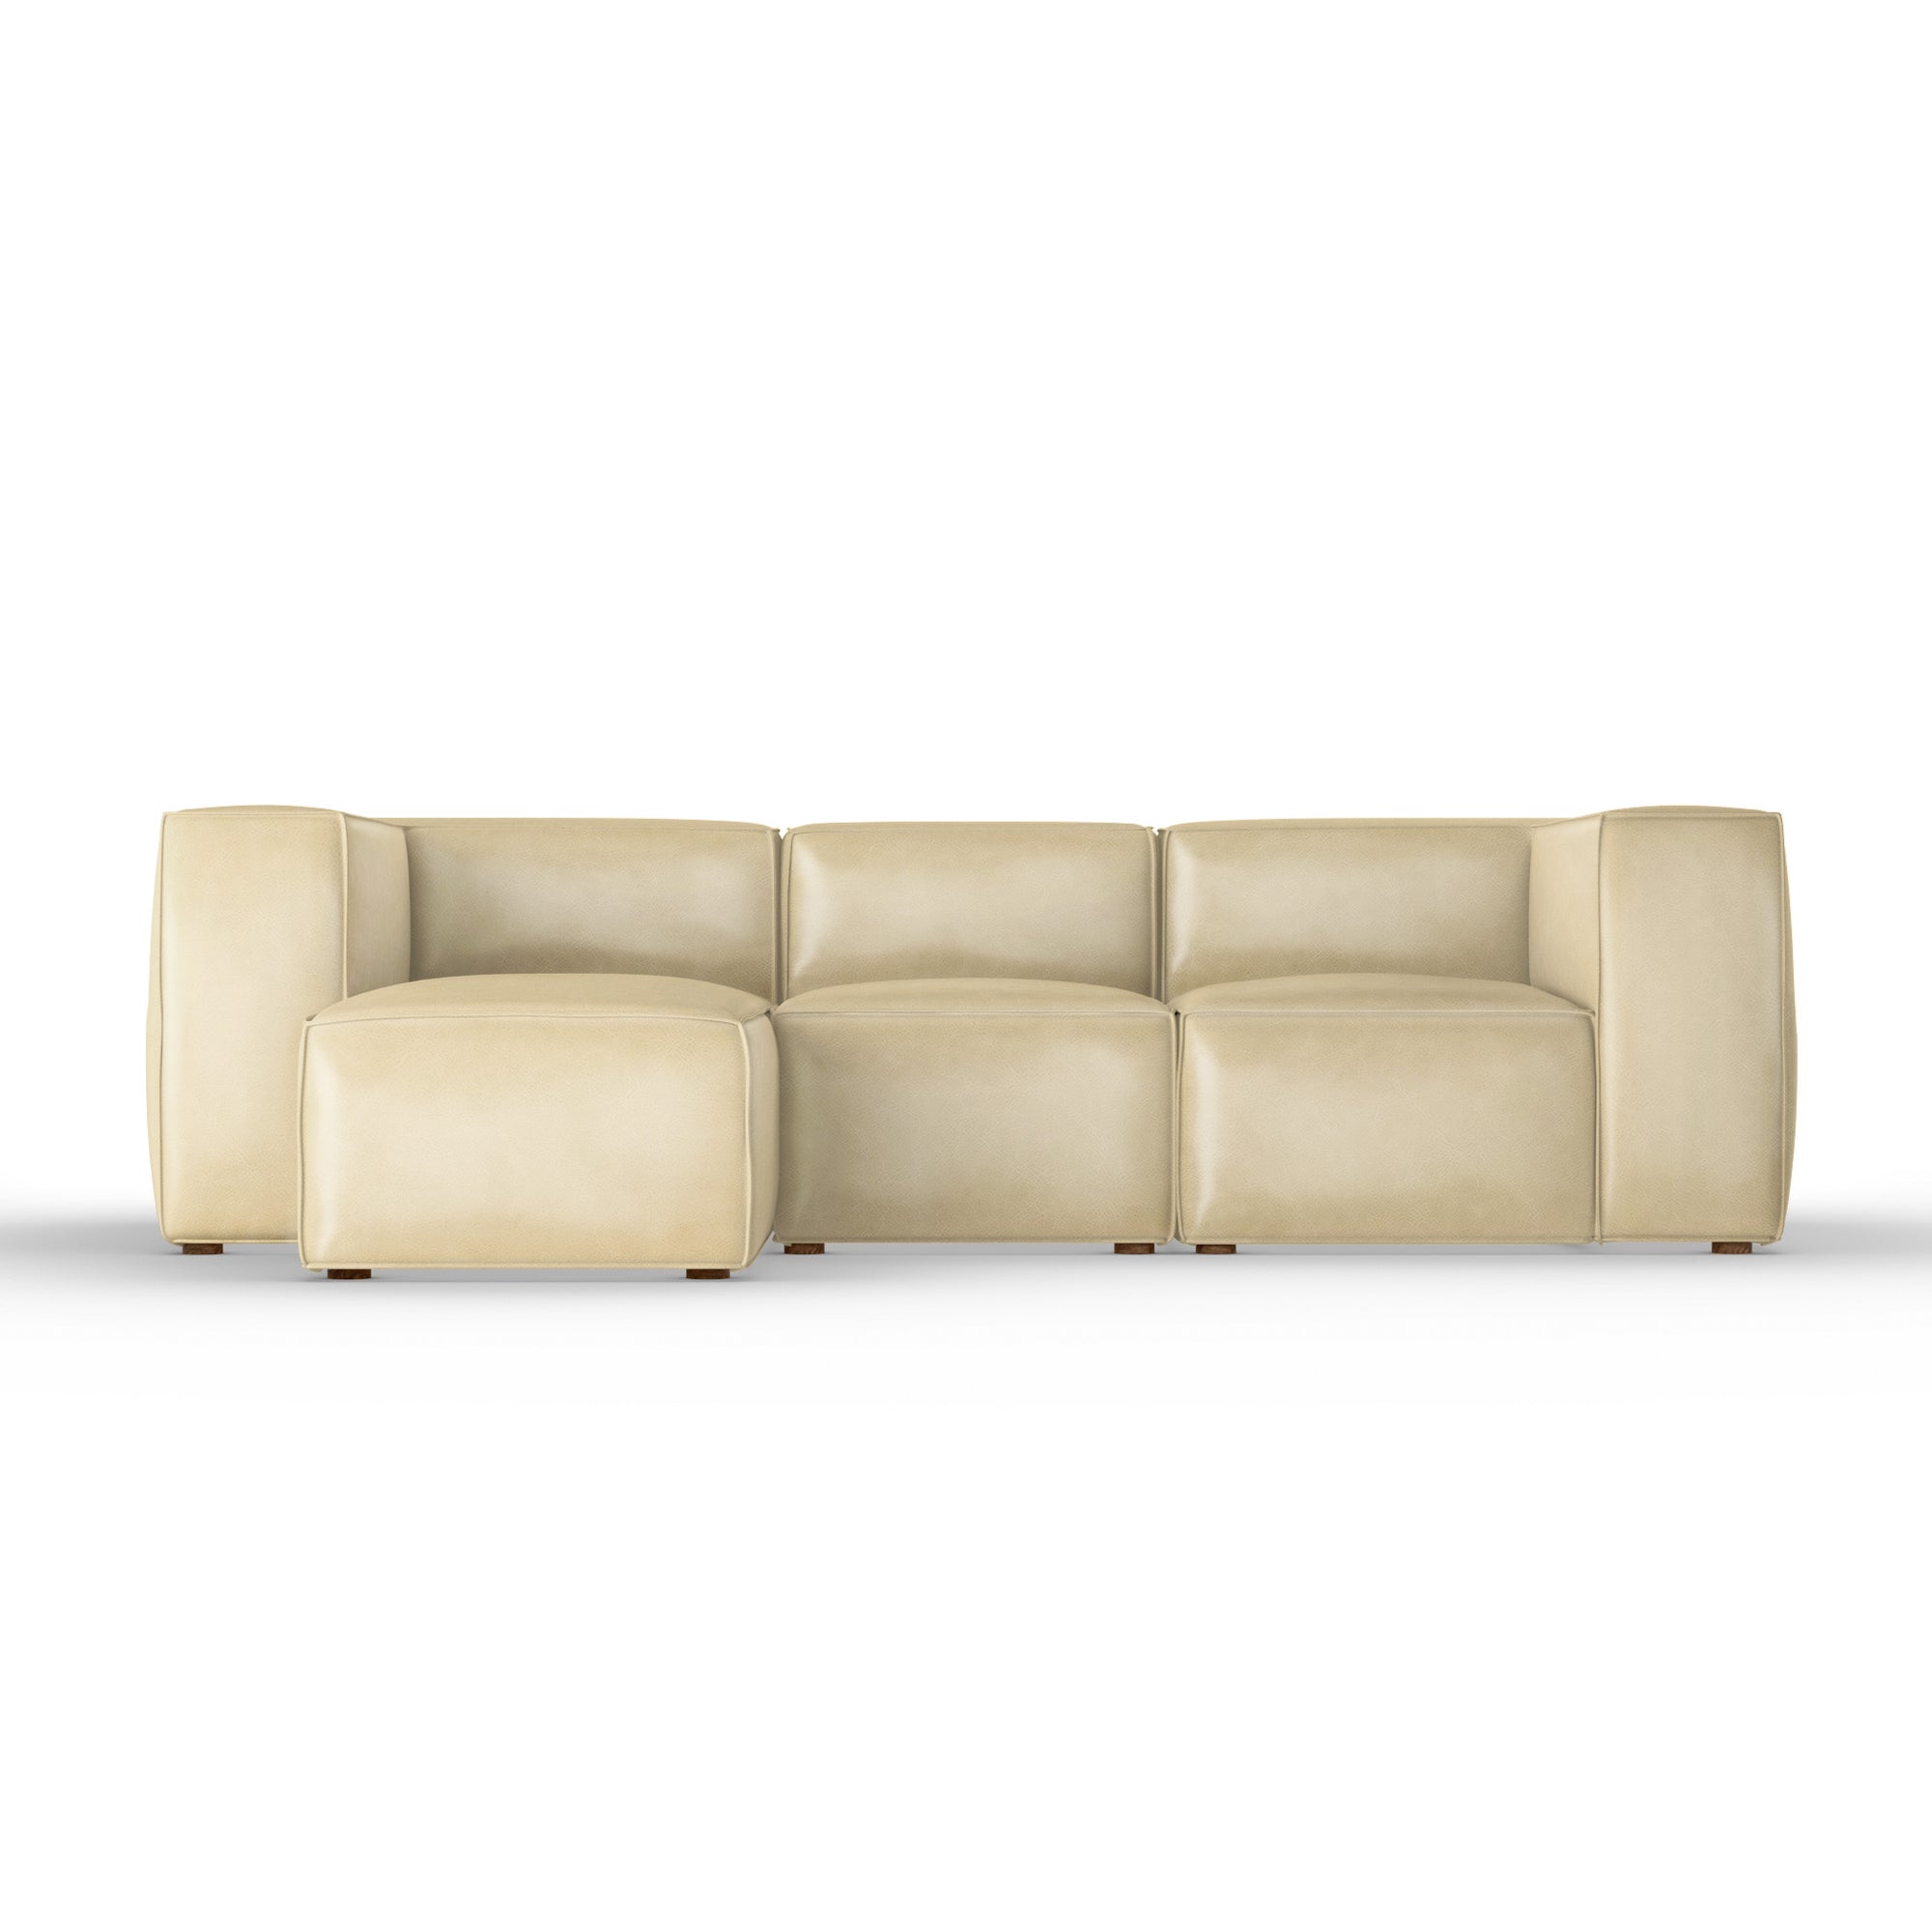 Varick Left-Chaise Sectional - Oyster Vintage Leather